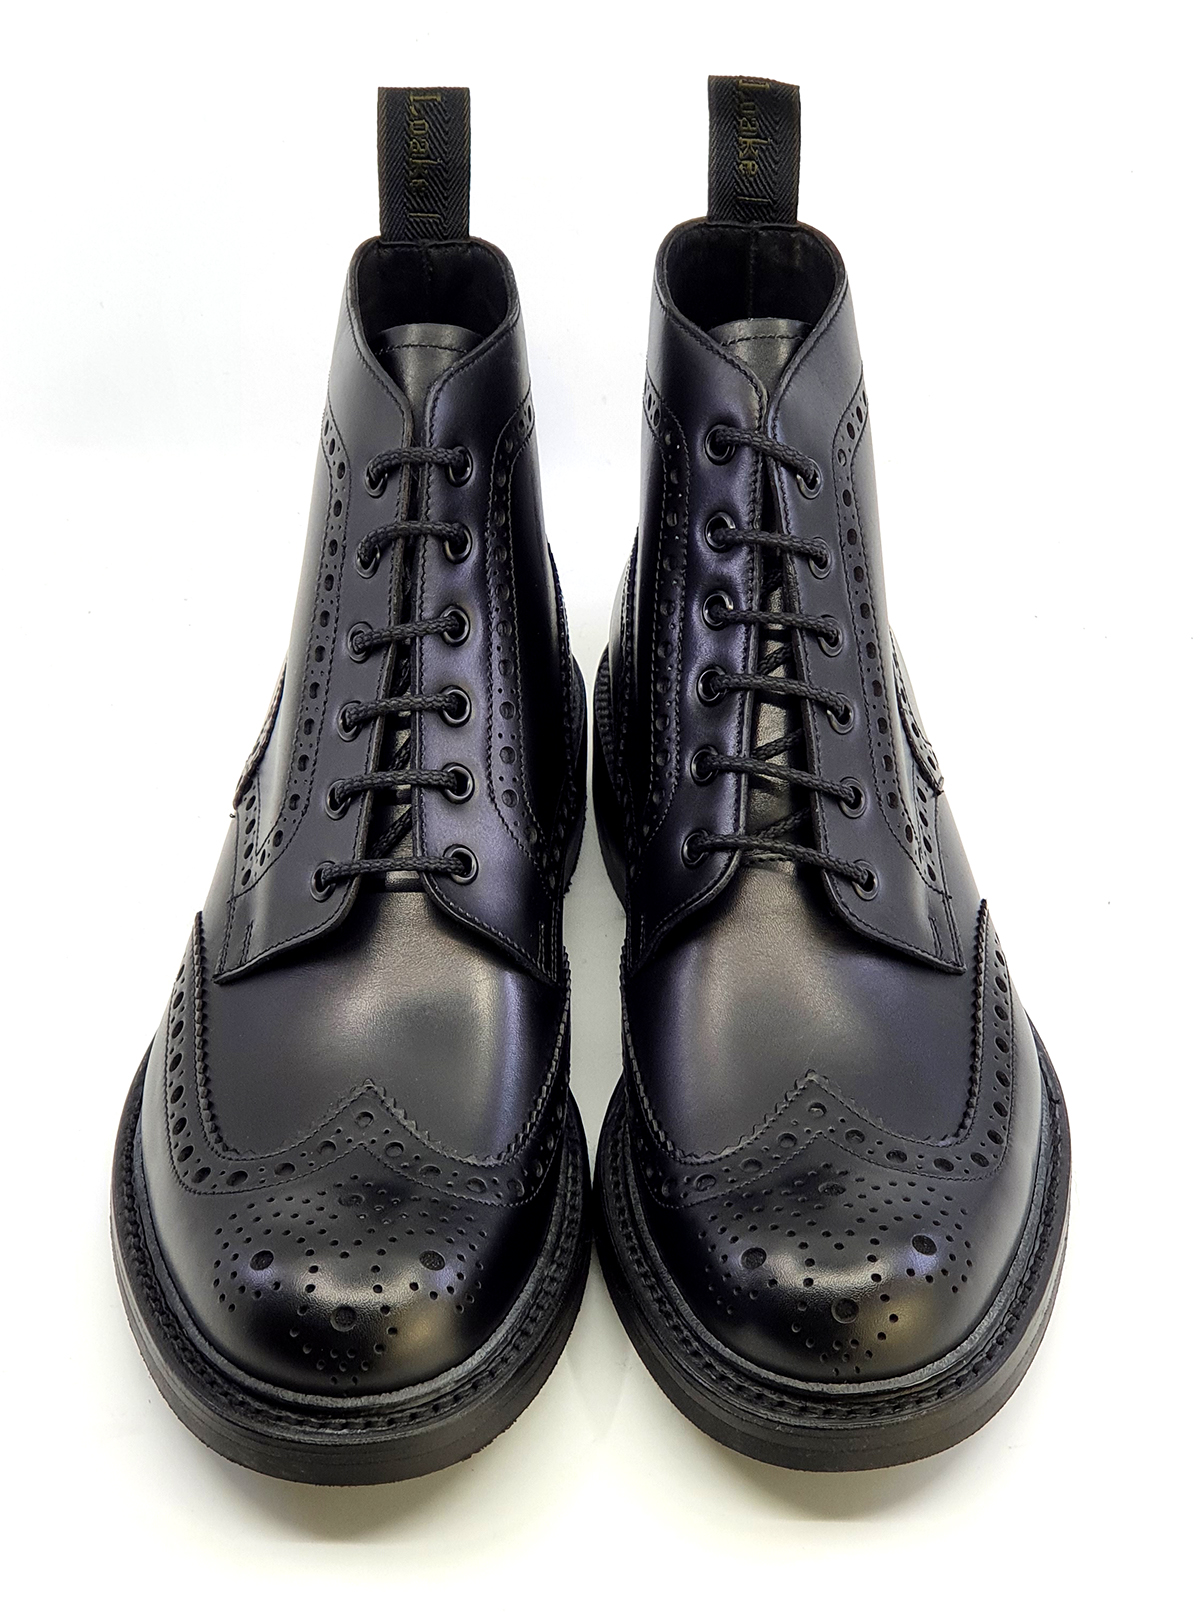 Loake Bedale Black Brogue Boots – Made In England – Mod Shoes